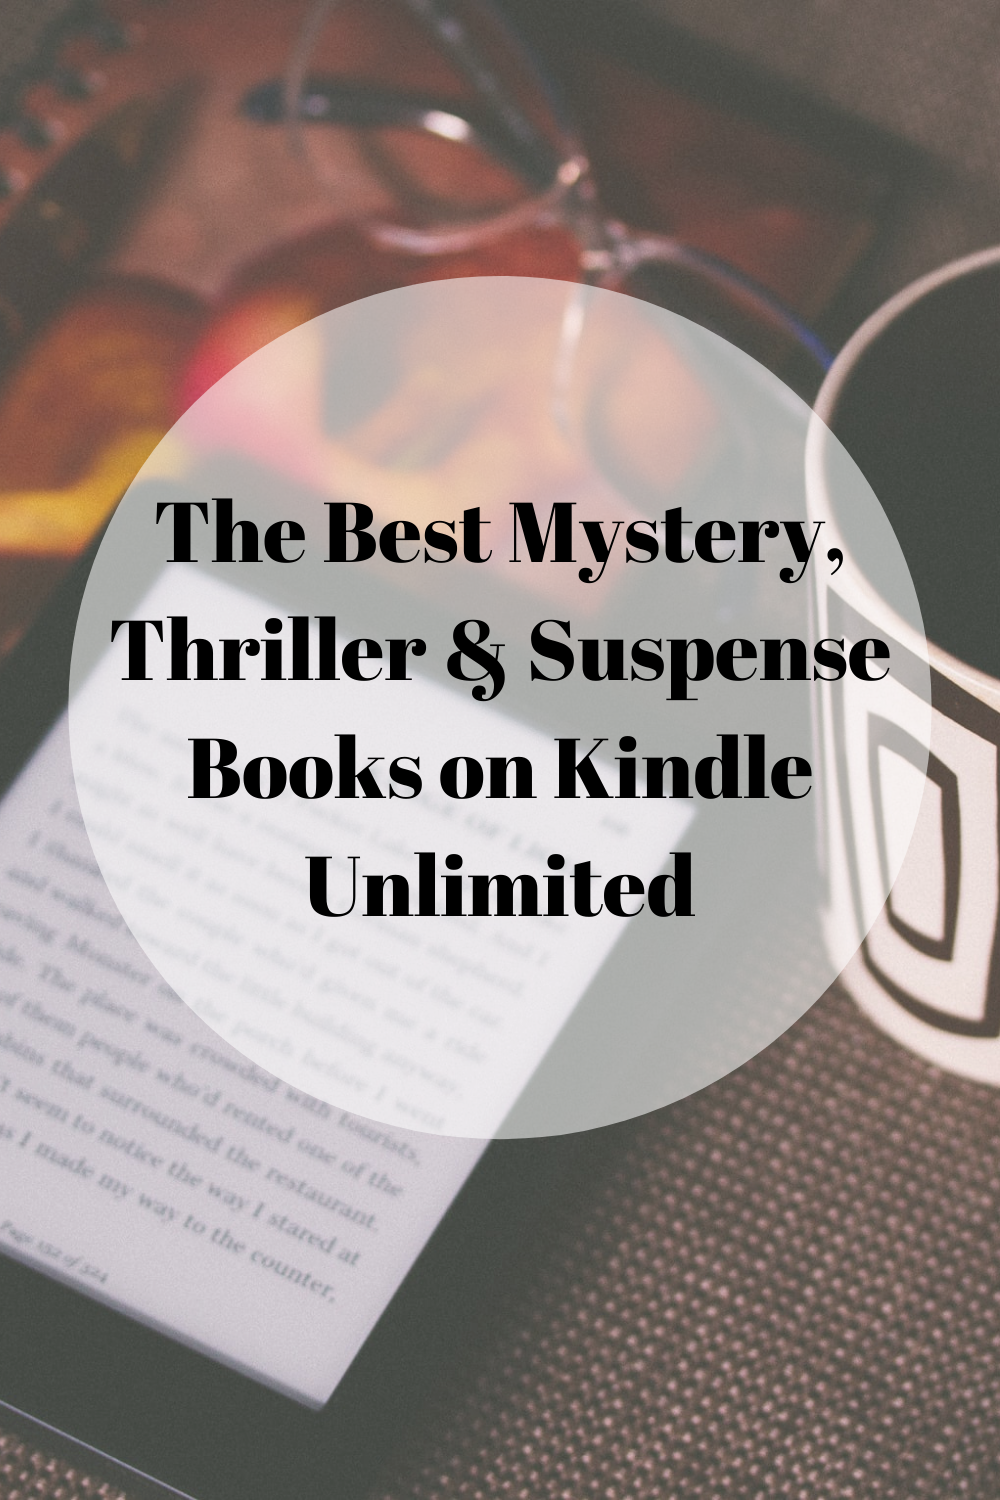 The Best Mystery, Thriller & Suspense Books on Kindle Unlimited